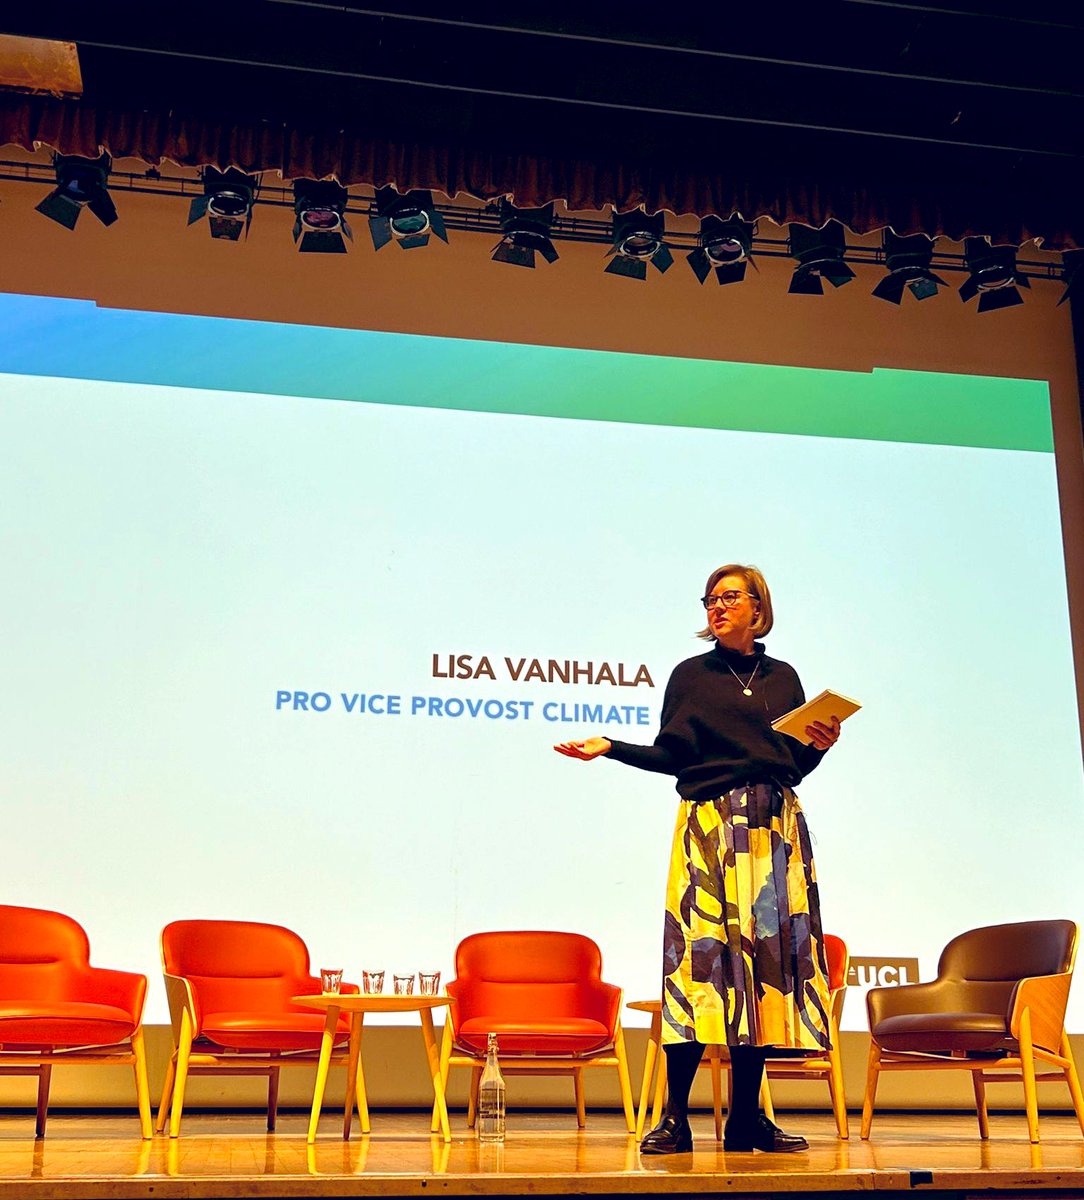 Last week our PI Lisa Vanhala spoke at the #loveyourplanet event in her new role as Pro-Vice-Provost for the @ucl Grand Challenges #climatecrisis theme. Lisa is very excited to be working on this important topic in the coming years with fellow Pro-Vice-Provost @ProfMarkMaslin!